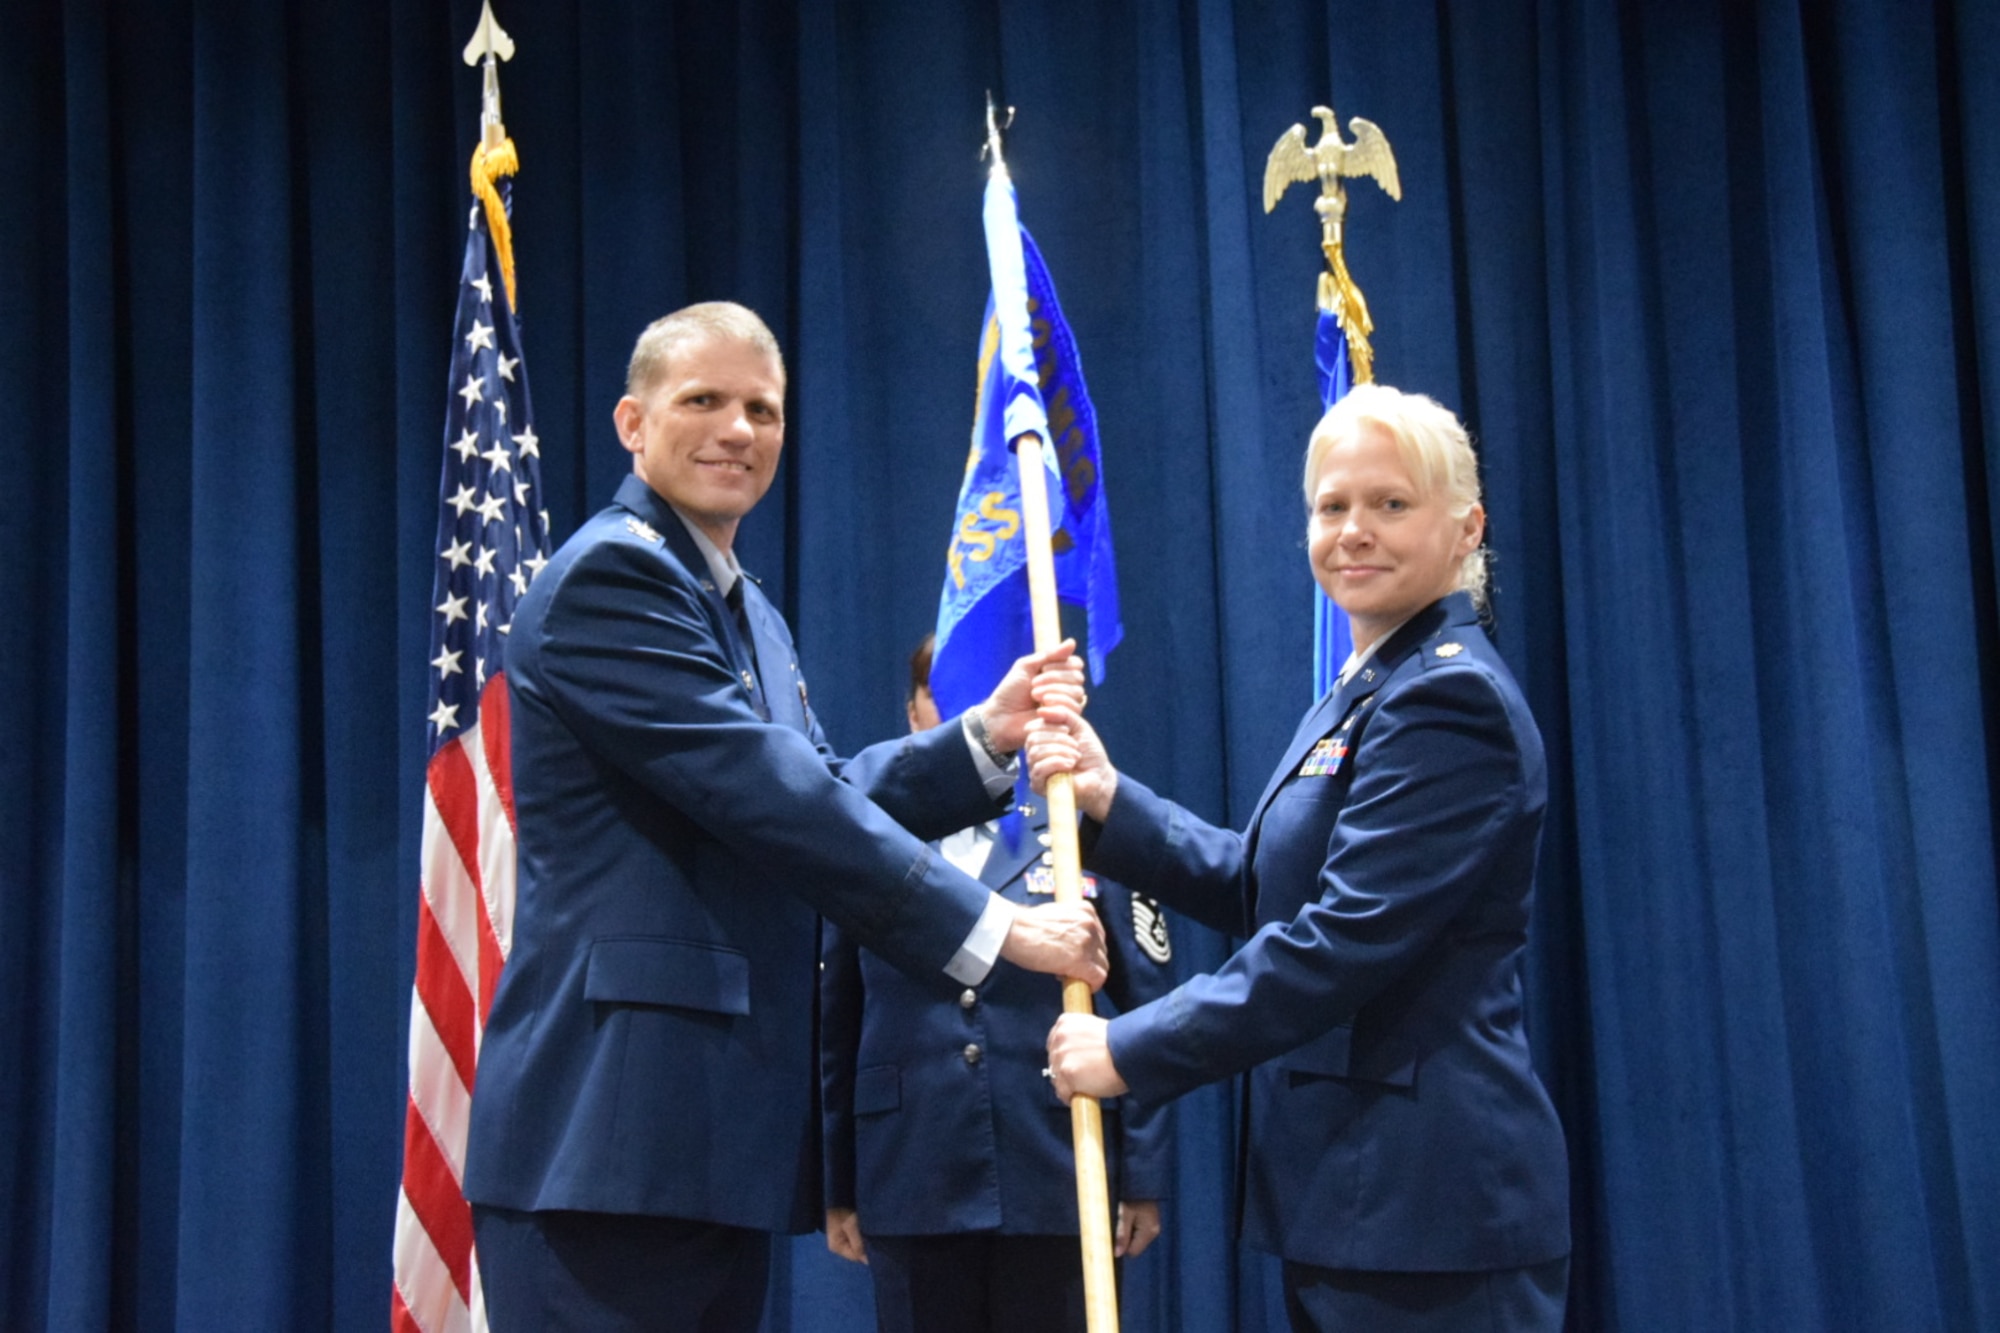 Maj. Robin L. Ecks takes the 433rd Force Support Squadron guidon from Col. David Enfield, 433rd Mission Support Group commander during an assumption of command ceremony held here Jan. 20, 2018.  She began her career as an enlisted member in 1996 and completed technical training as a health services management apprentice. (U.S. Air Force photo by Tech Sgt. Carlos J. Treviño)